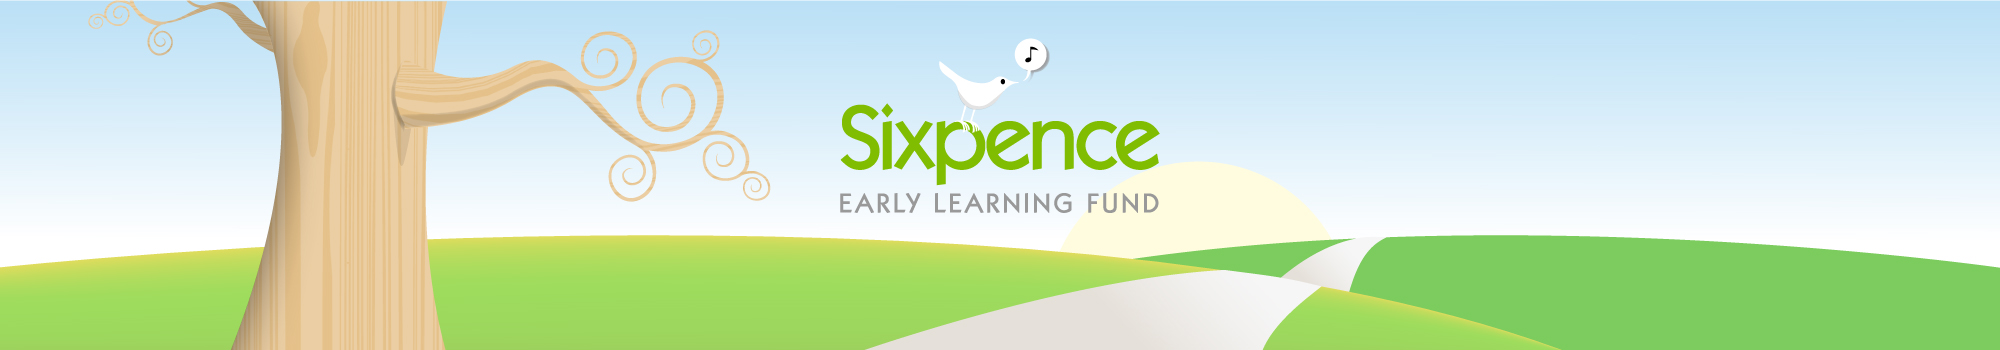 SIXPENCE EARLY LEARNING FUND BANNER